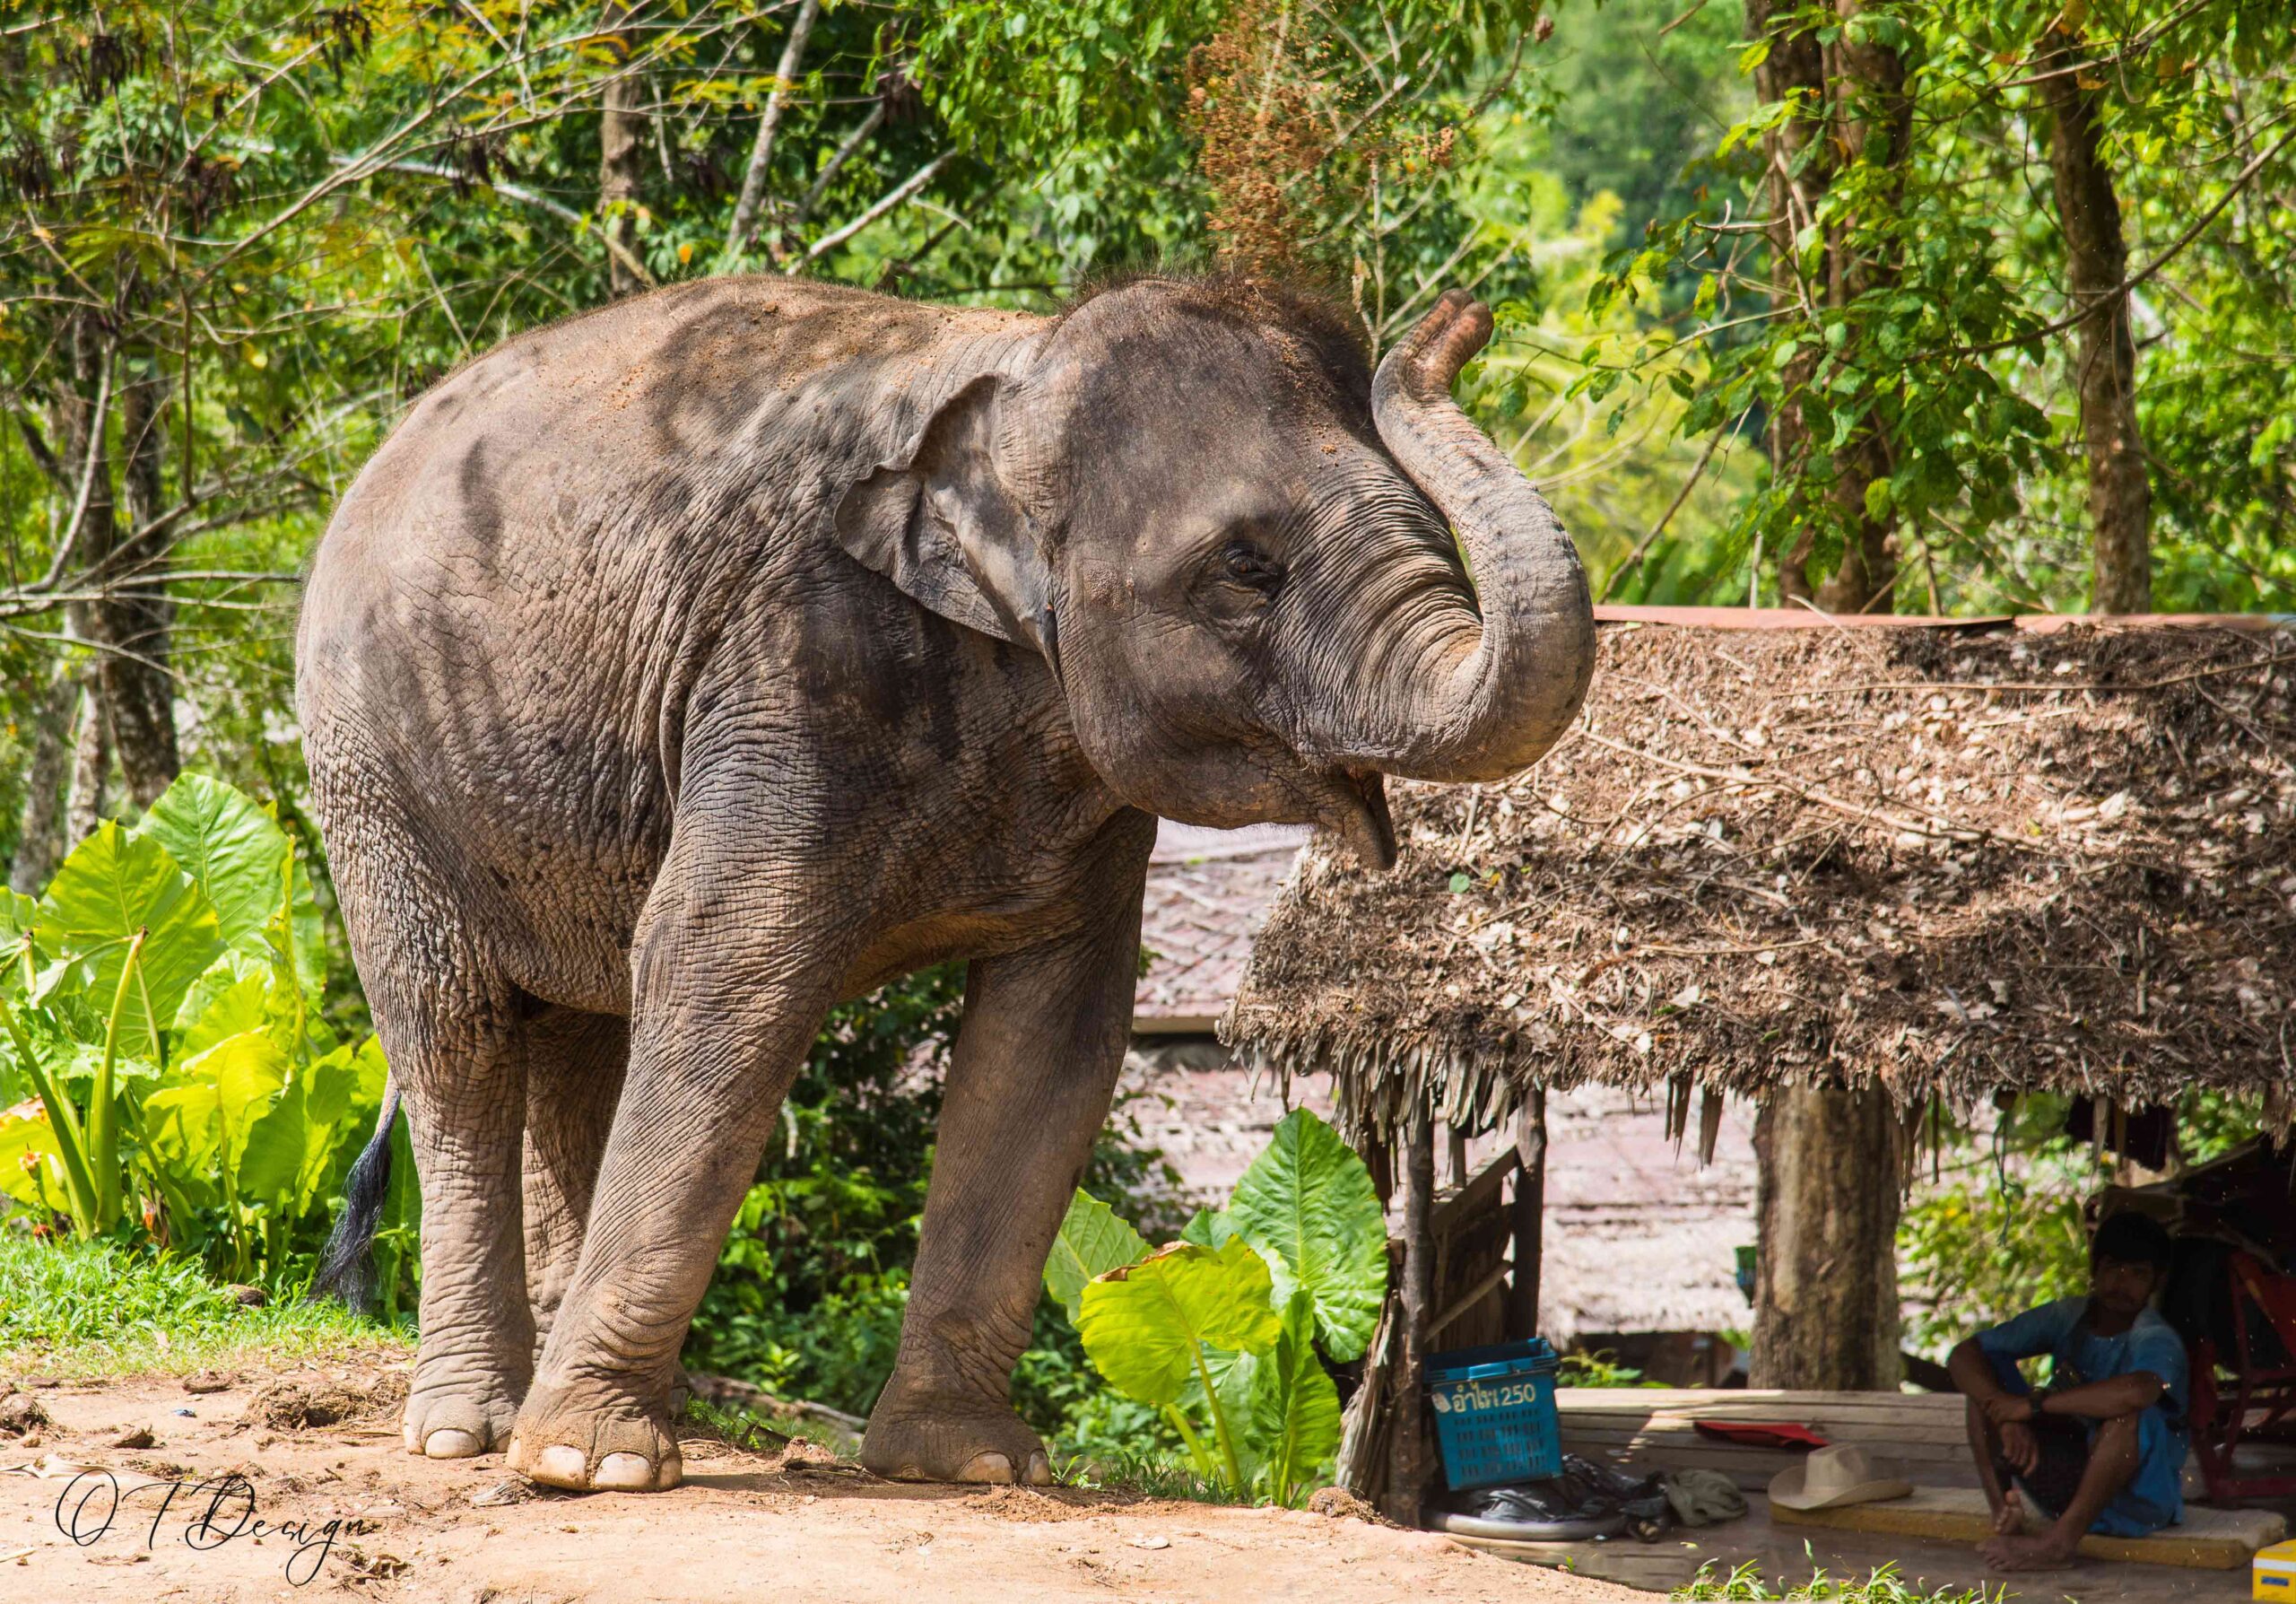 A gentle playful elephant in its habitat in Phuket, Thailand